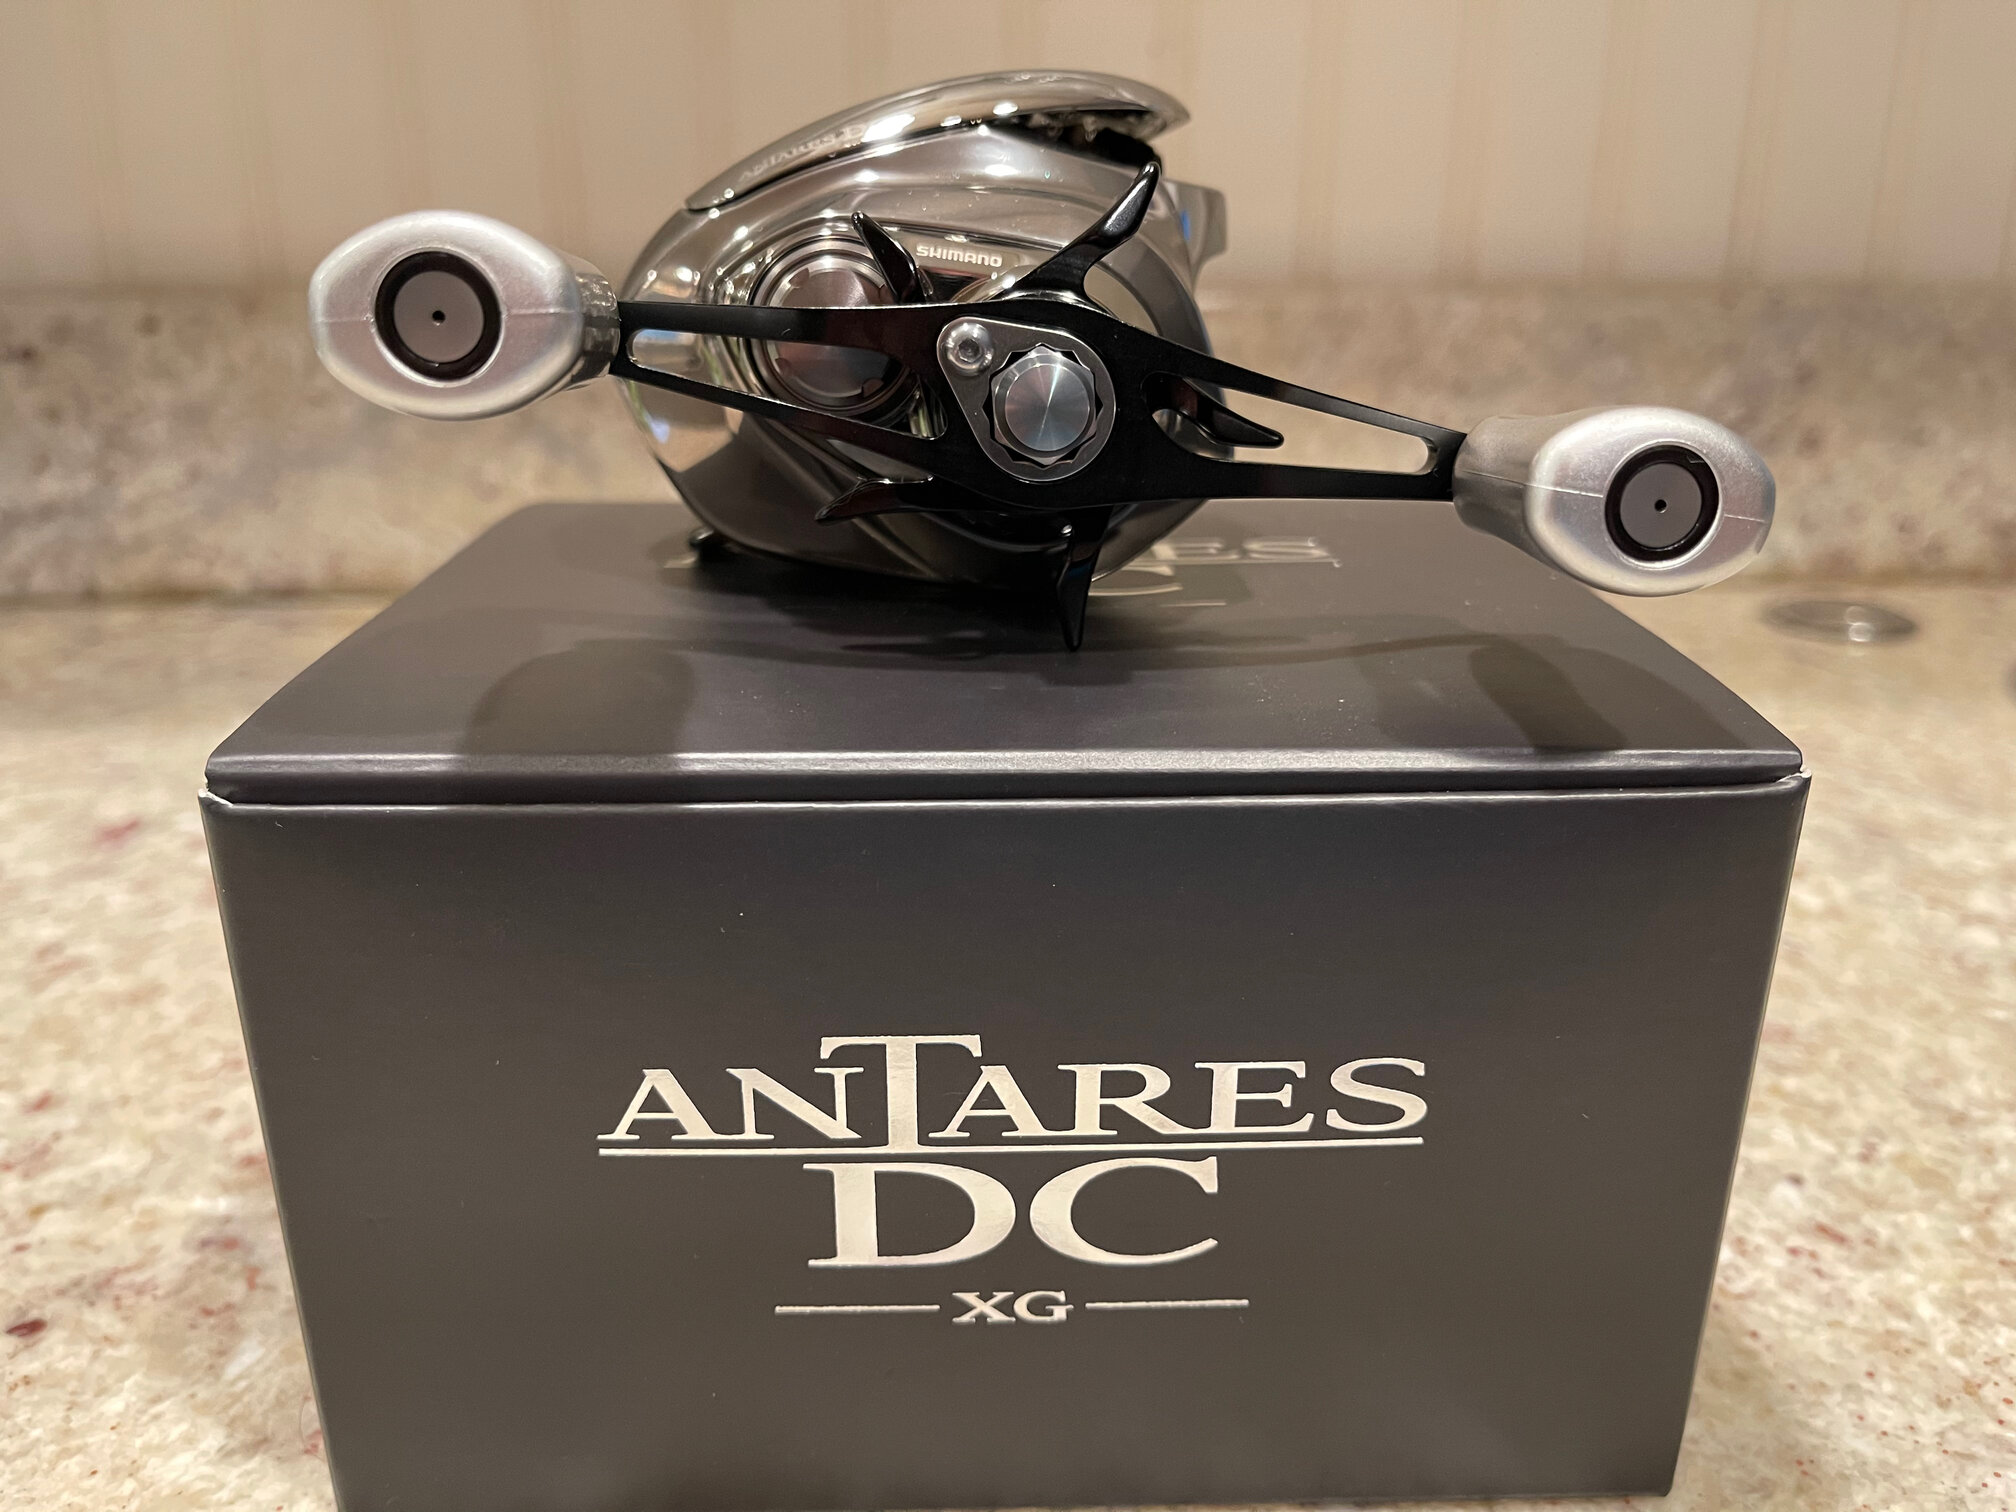 For the 2021 Antares DC Fans - Fishing Rods, Reels, Line, and